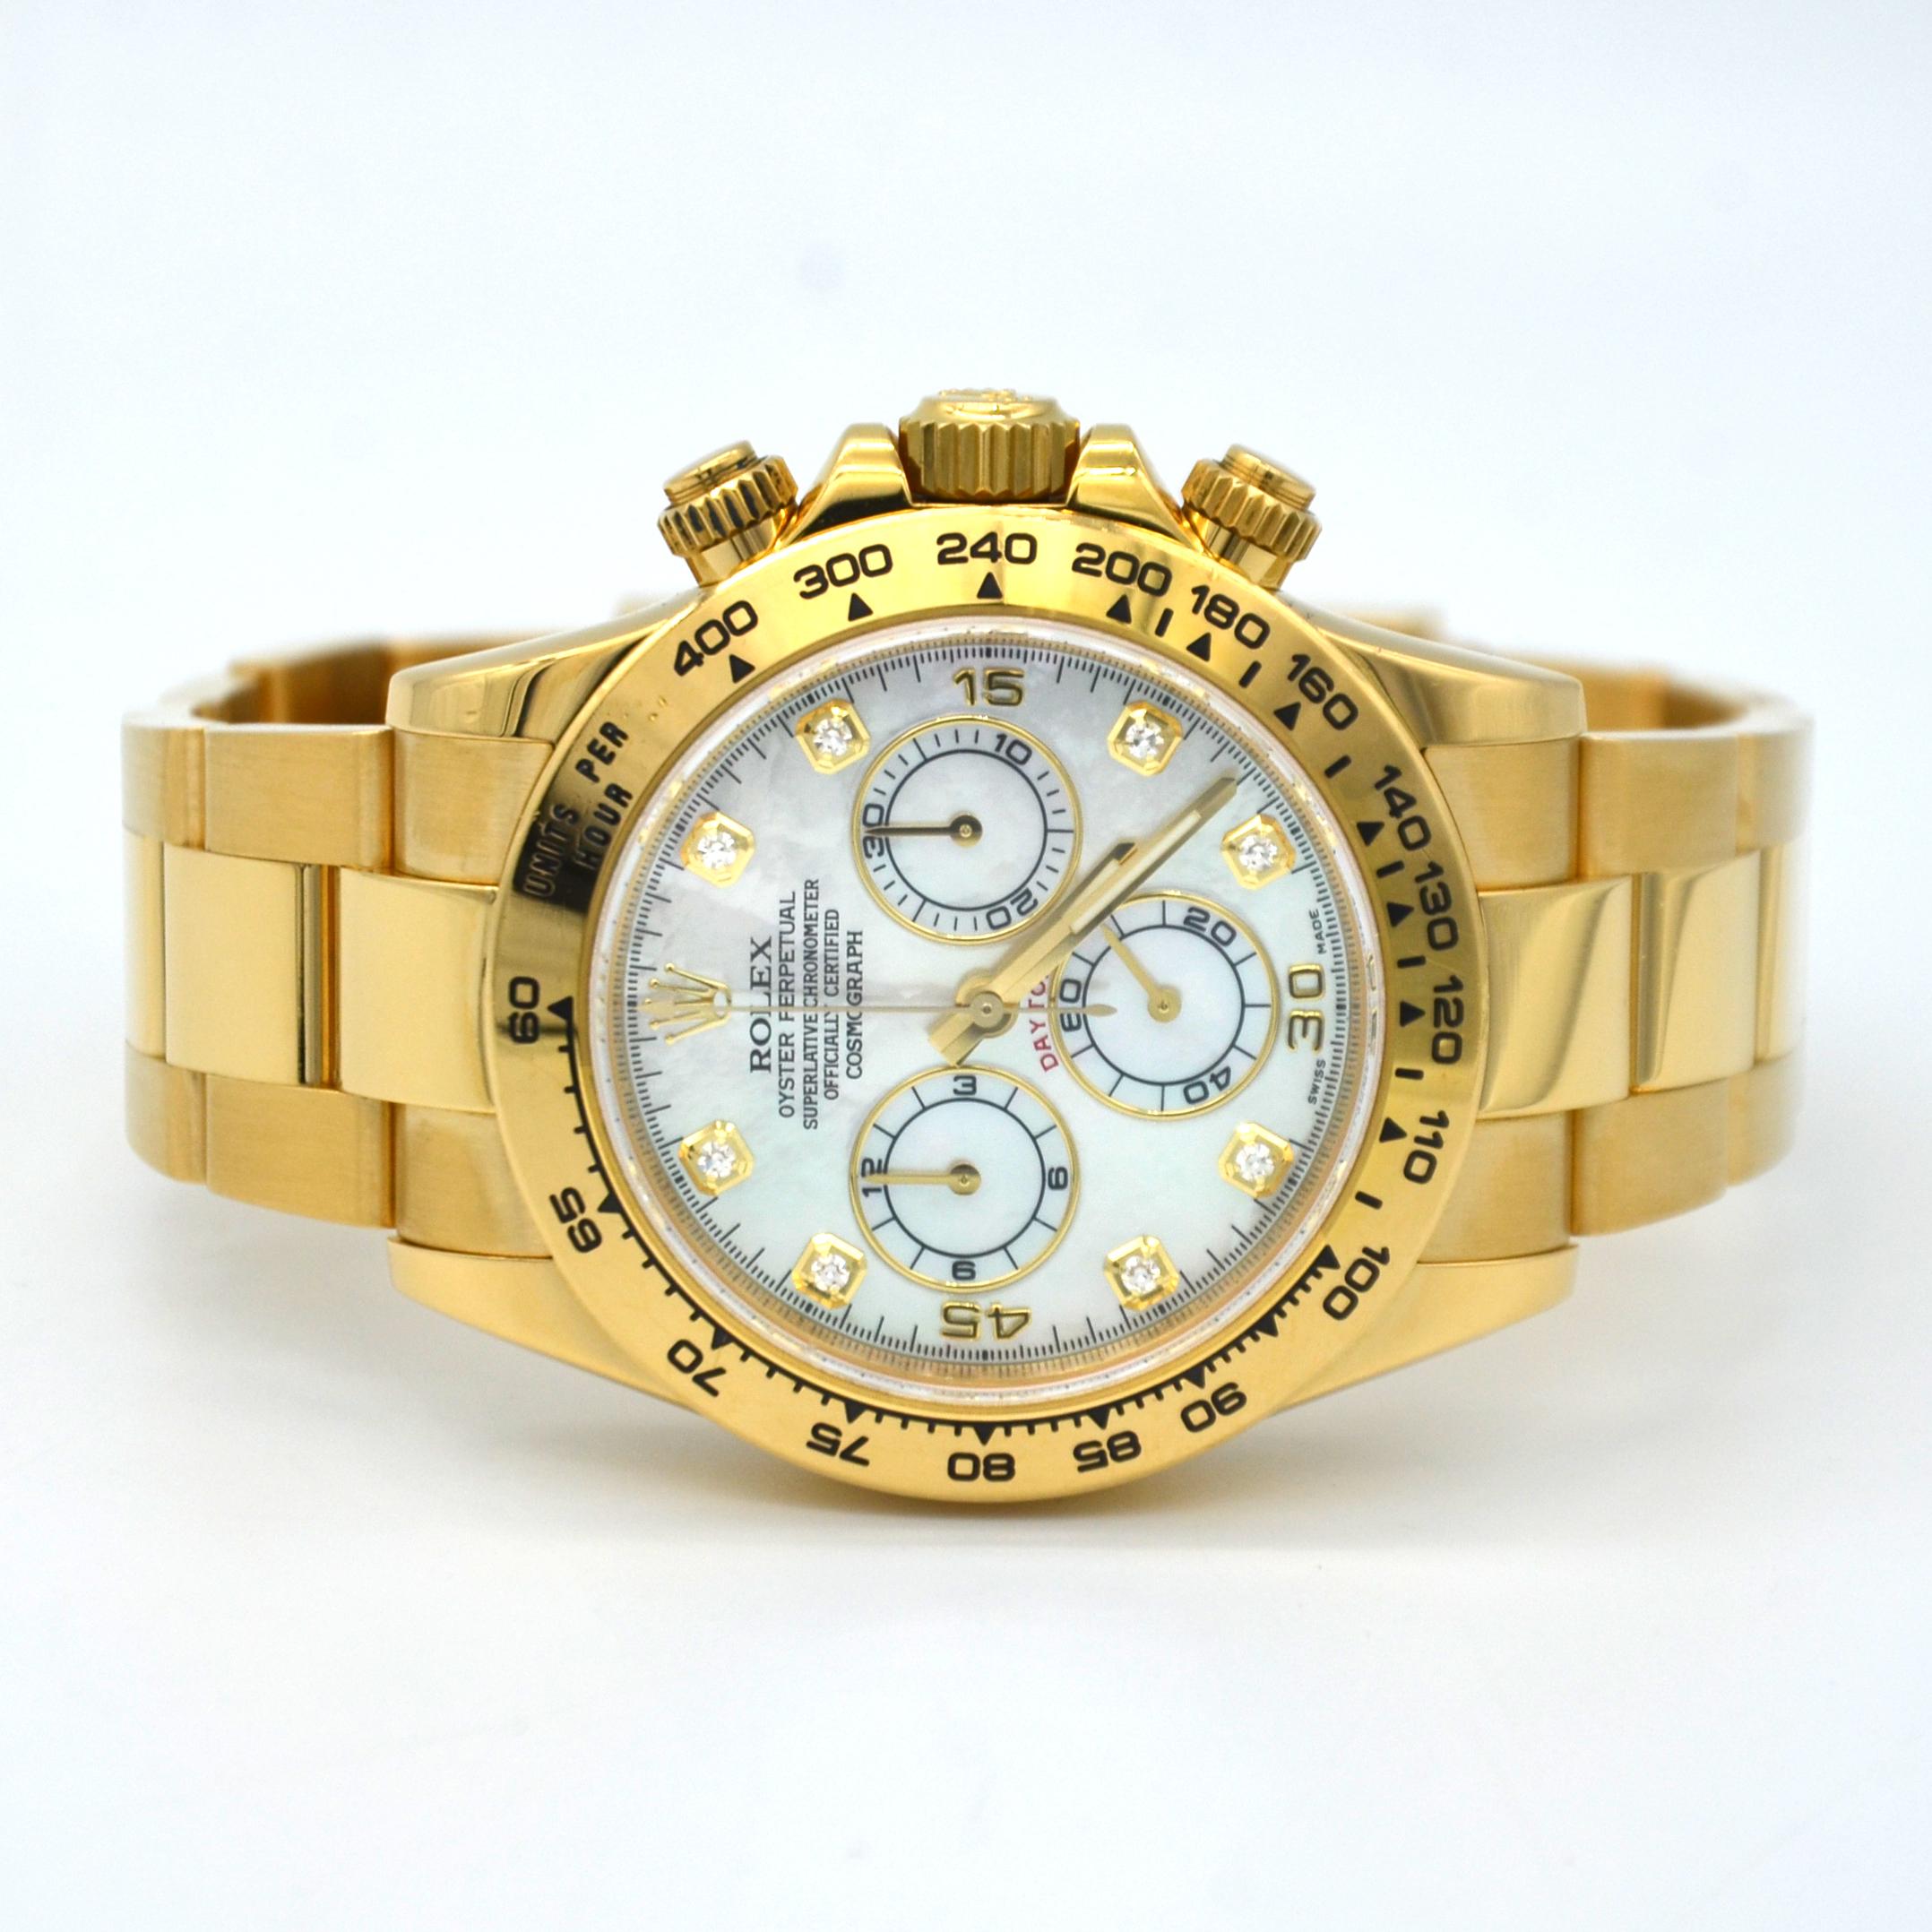 18k yellow gold case with a 18k yellow gold rolex oyster bracelet. Fixed 18k yellow gold tachymeter bezel. White Mother of Pearl Diamond dial with gold-tone hands and index hour markers. Minute markers around the outer rim. Dial Type: Analog.